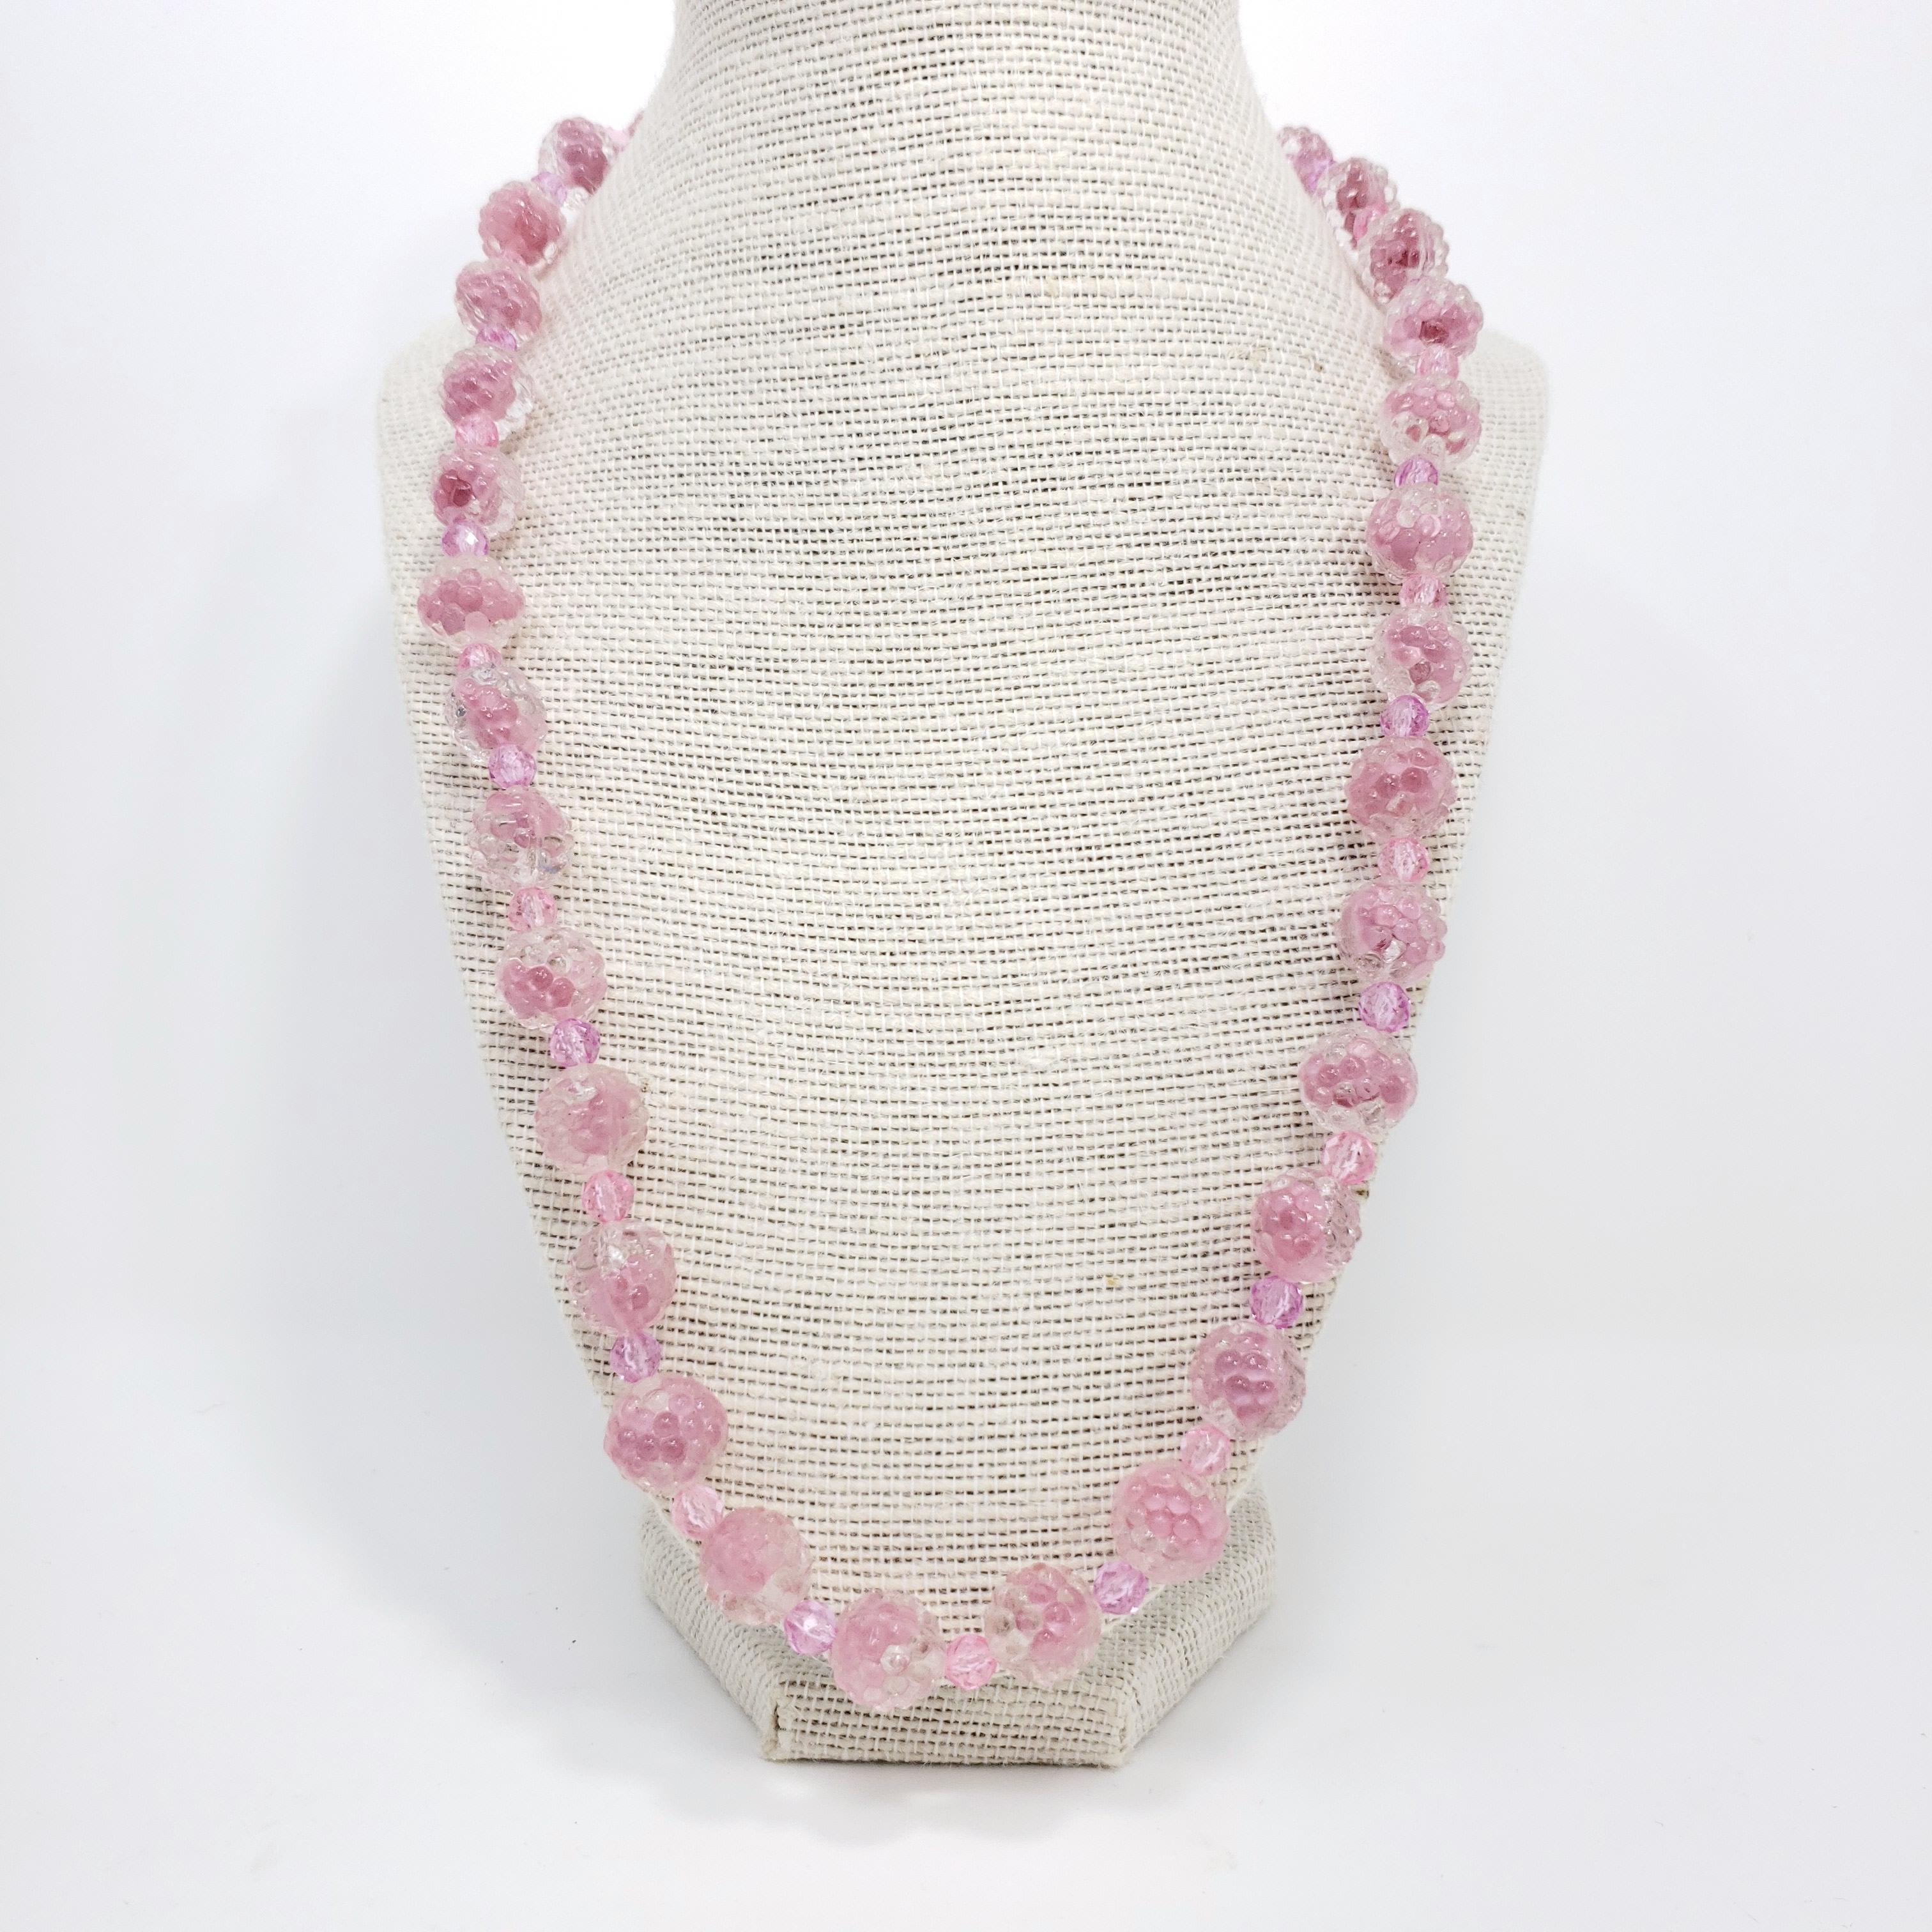 Carved pink and clear crystal necklace for just the right touch of retro glamour!

Brass-tone spring-ring clasp.